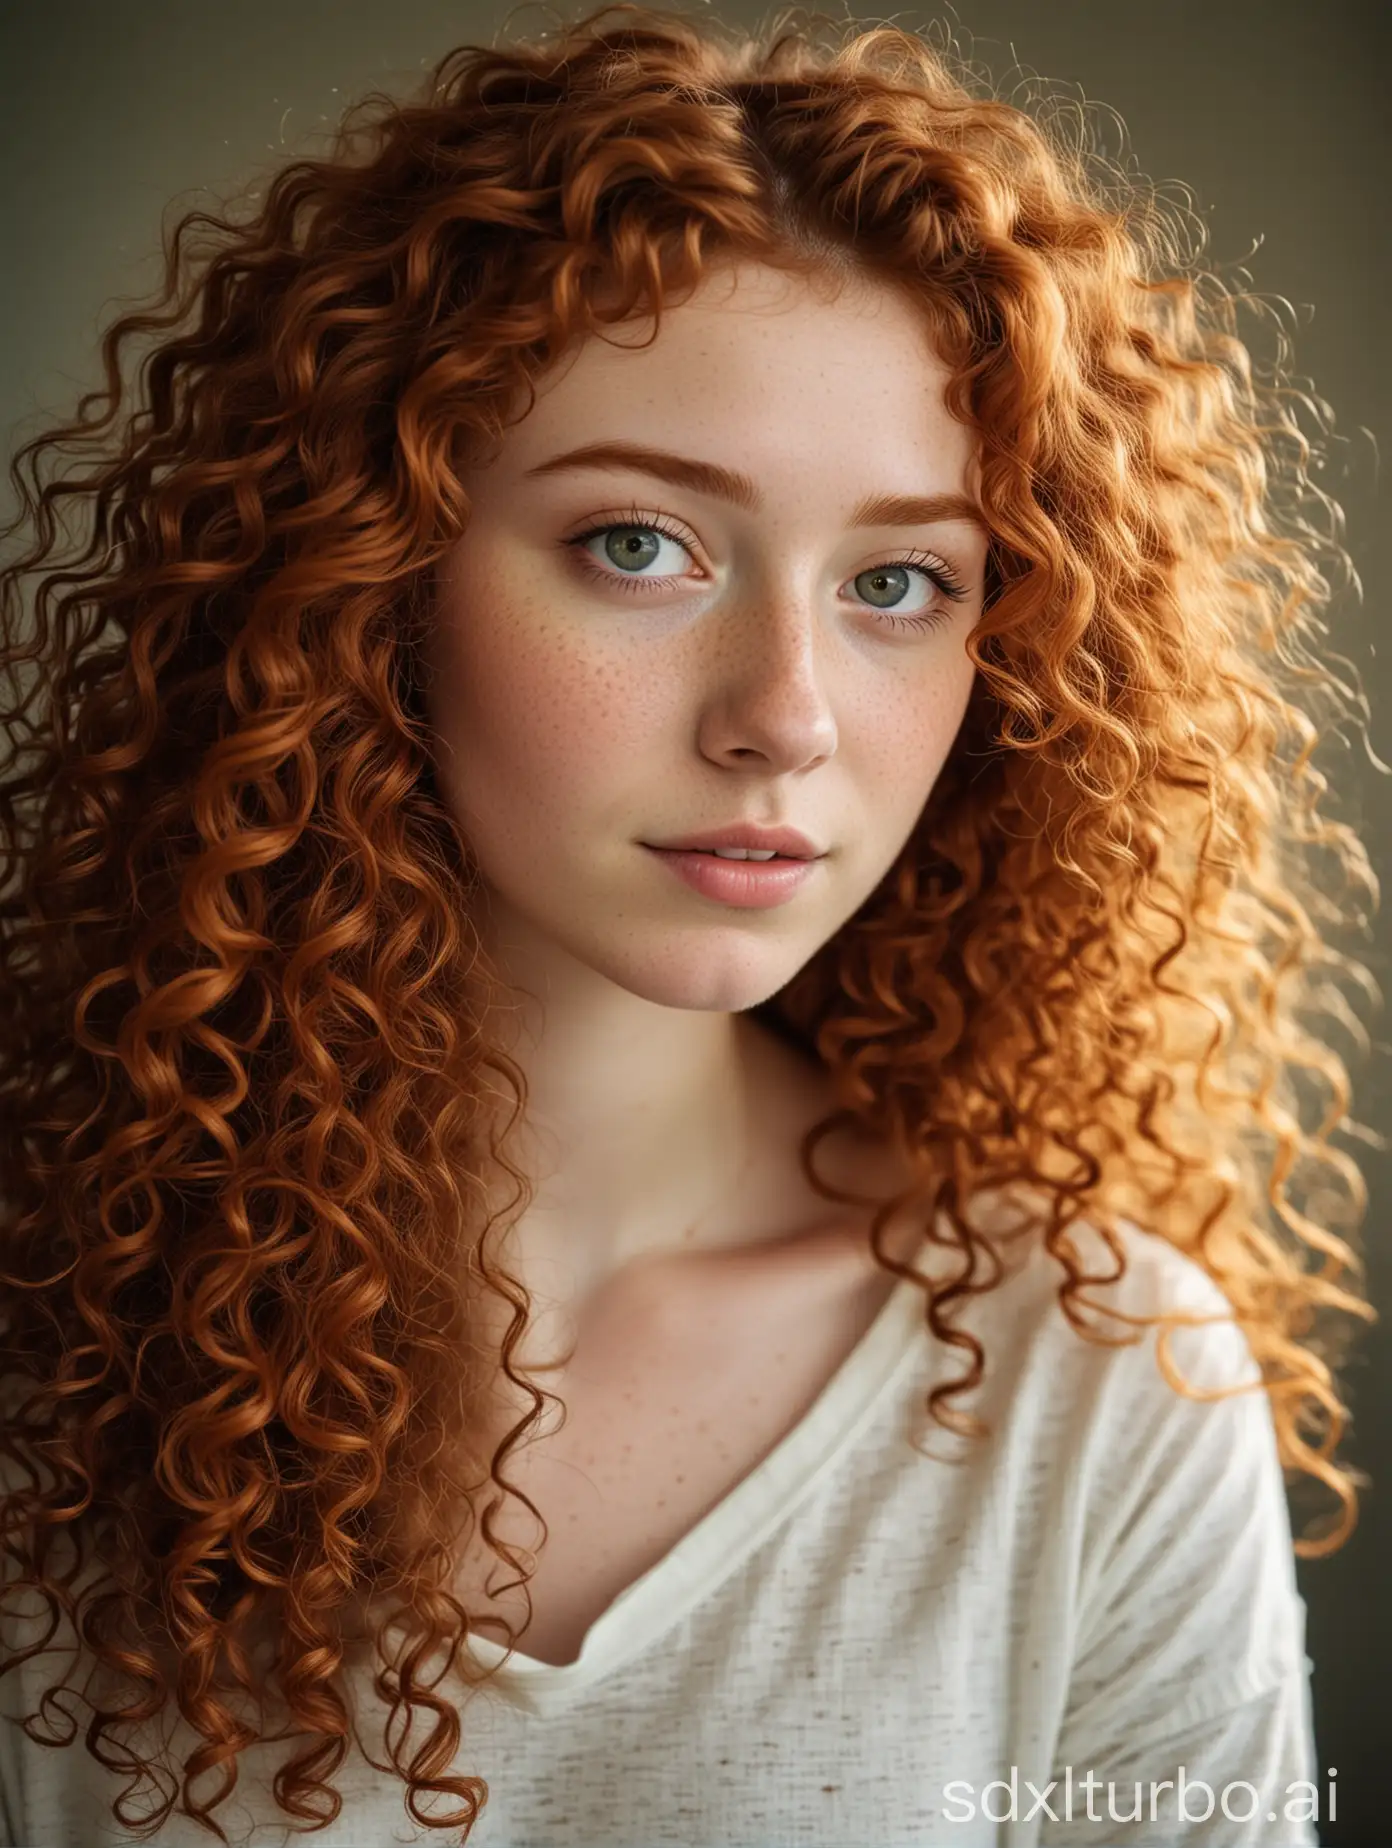 Radiant-Ginger-College-Girl-Portrait-Captivating-Beauty-in-Hasselblad-Masterpiece